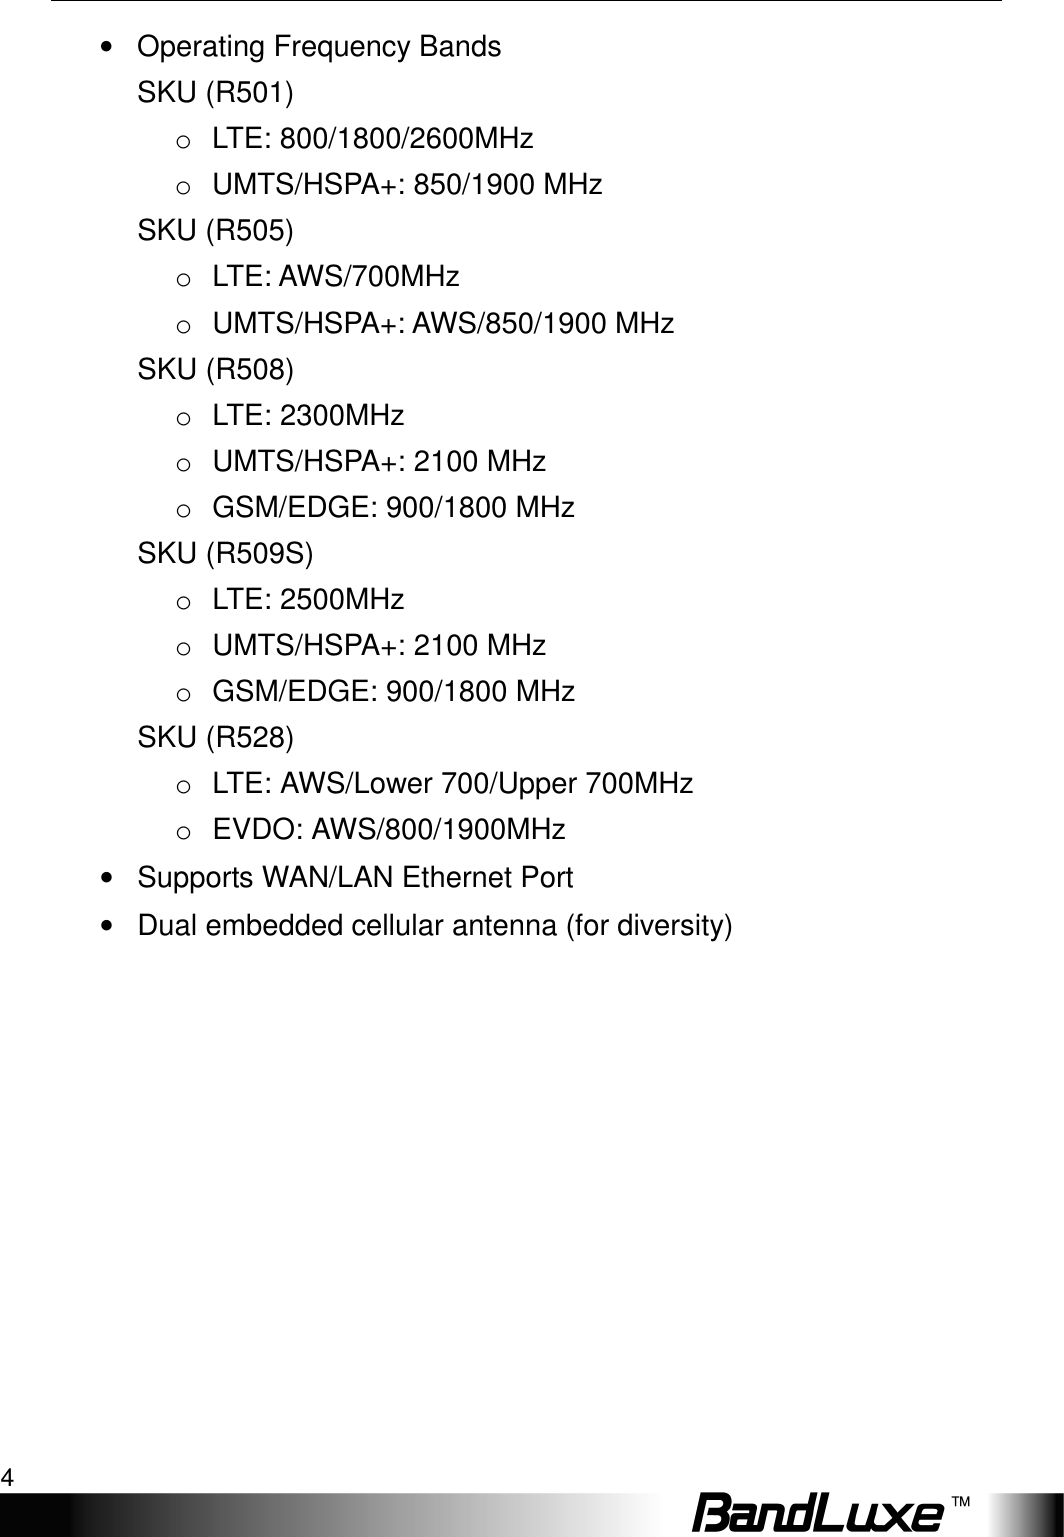 Package Contents 4  •  Operating Frequency Bands SKU (R501) o  LTE: 800/1800/2600MHz   o  UMTS/HSPA+: 850/1900 MHz SKU (R505) o  LTE: AWS/700MHz o  UMTS/HSPA+: AWS/850/1900 MHz SKU (R508) o  LTE: 2300MHz o  UMTS/HSPA+: 2100 MHz o  GSM/EDGE: 900/1800 MHz SKU (R509S) o  LTE: 2500MHz o  UMTS/HSPA+: 2100 MHz o  GSM/EDGE: 900/1800 MHz SKU (R528) o  LTE: AWS/Lower 700/Upper 700MHz o  EVDO: AWS/800/1900MHz •  Supports WAN/LAN Ethernet Port •  Dual embedded cellular antenna (for diversity) 